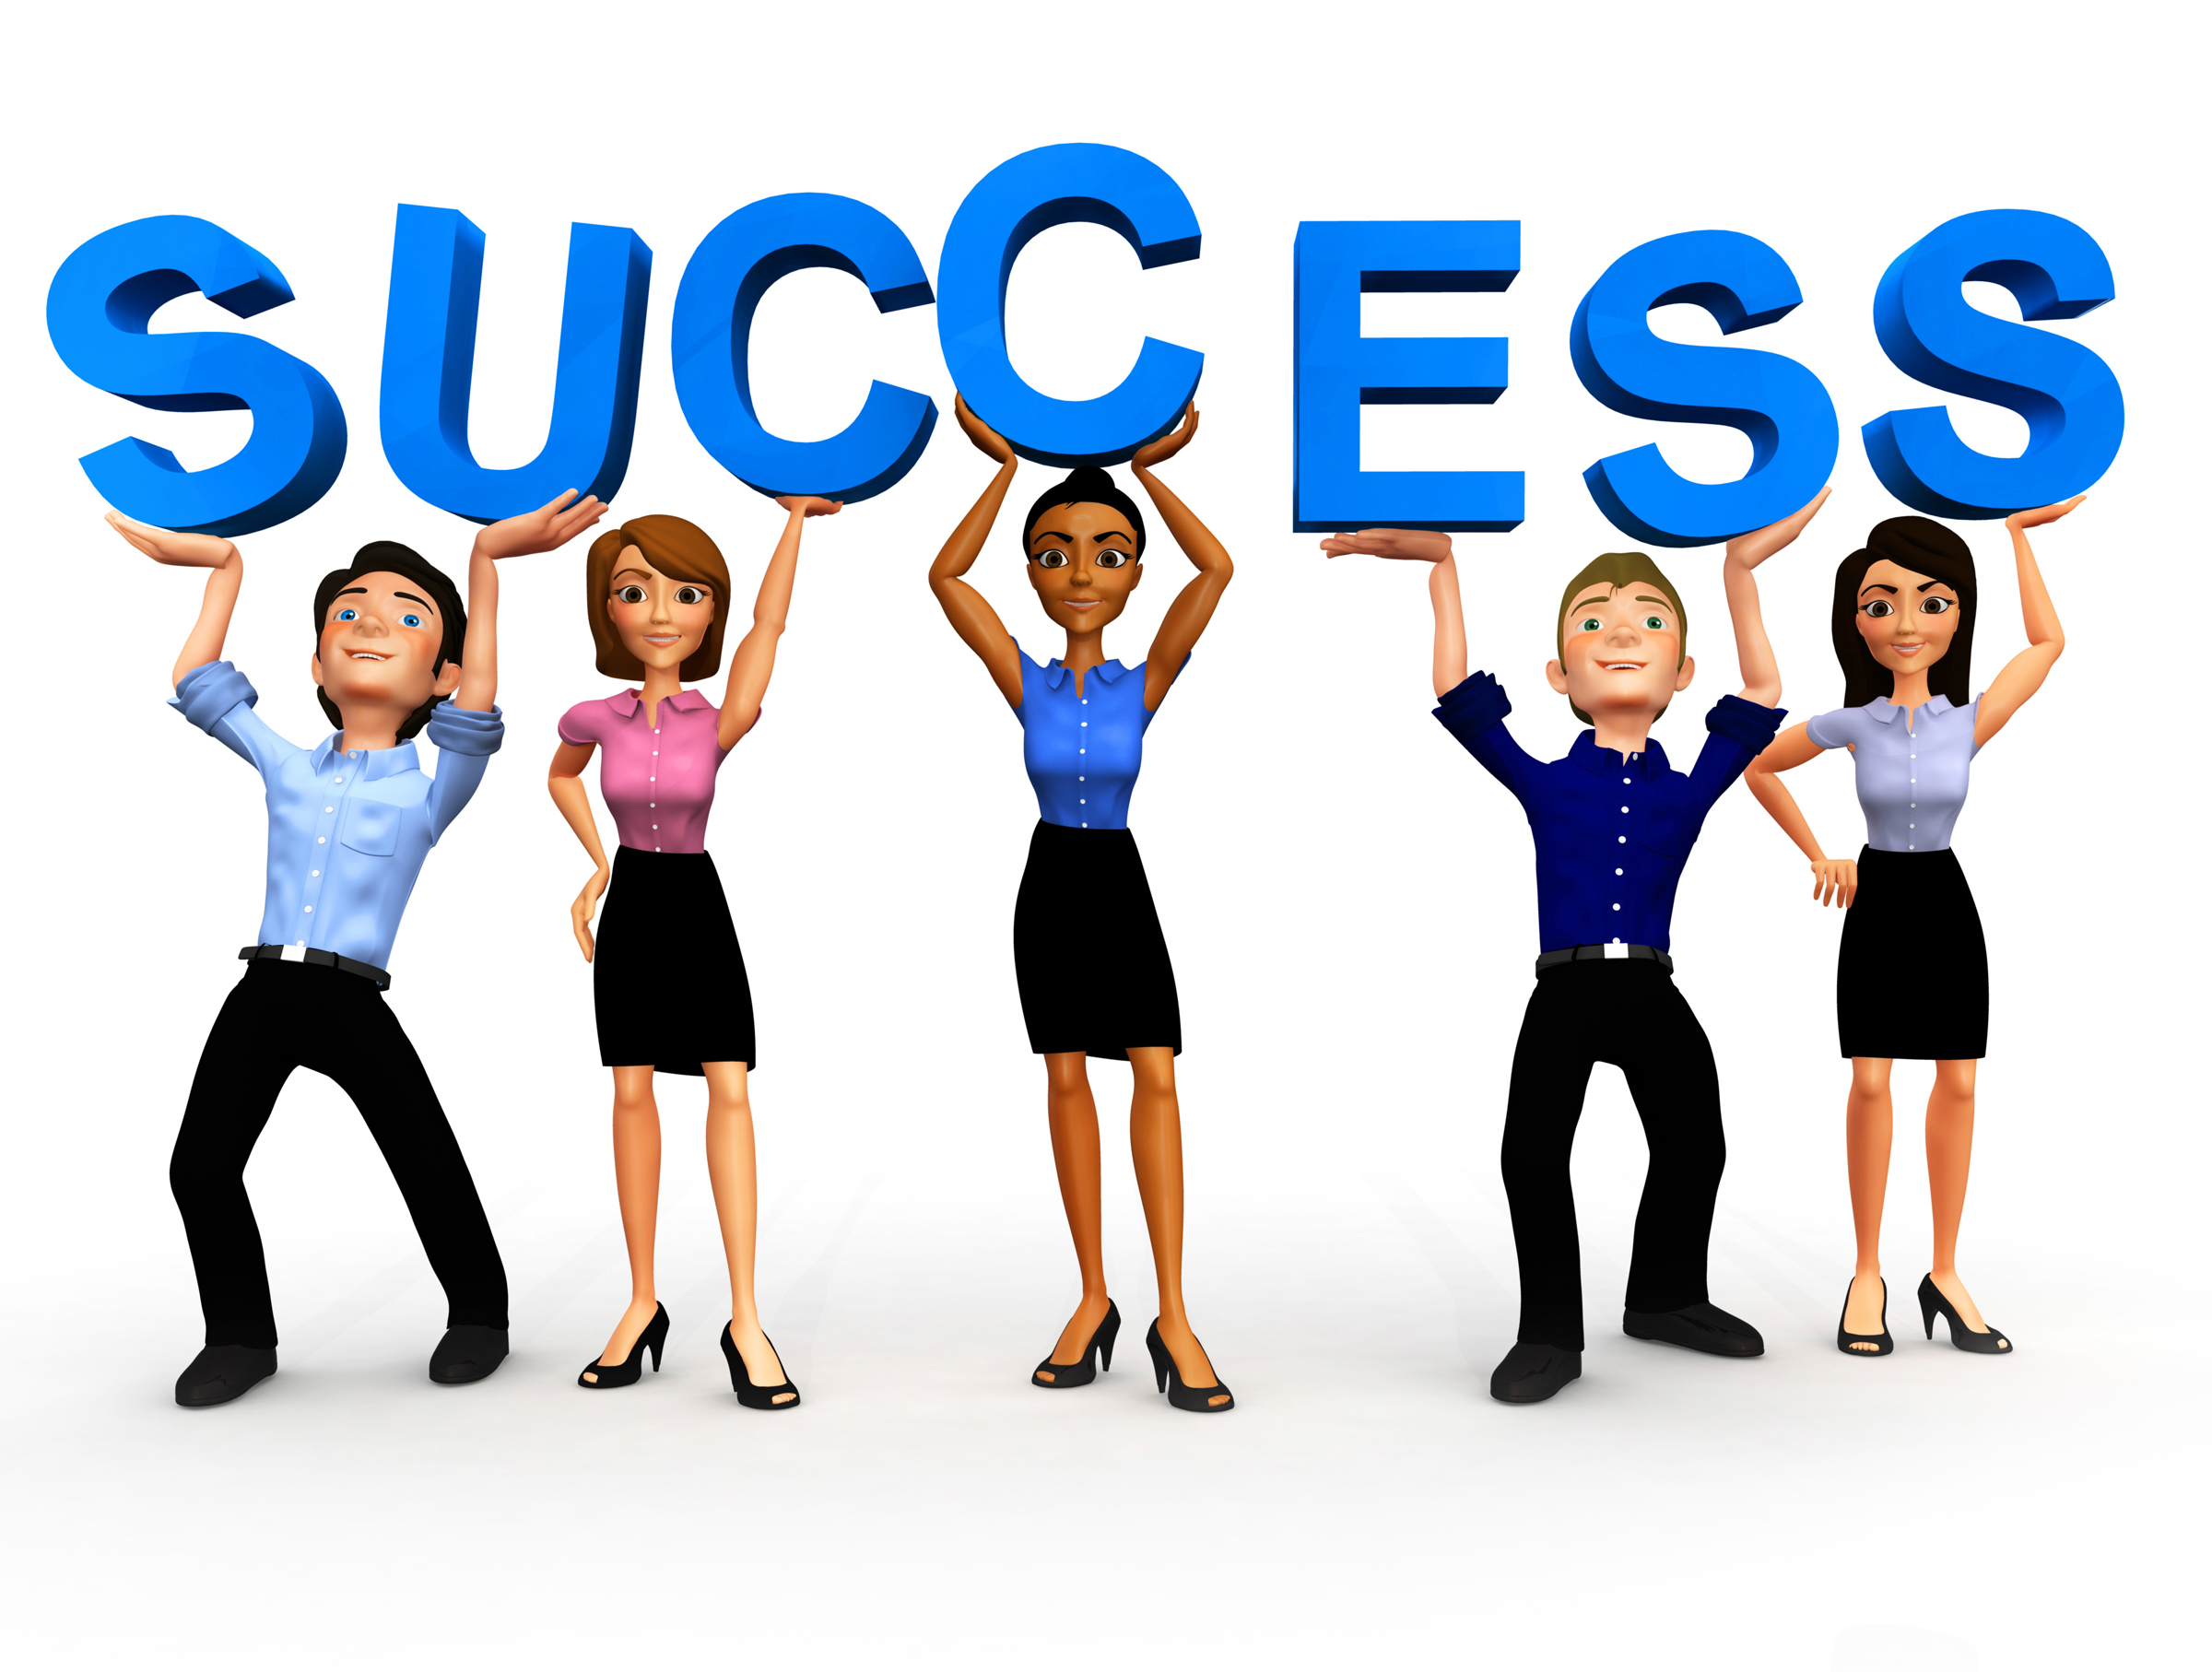 Business people clipart free clipart images 4